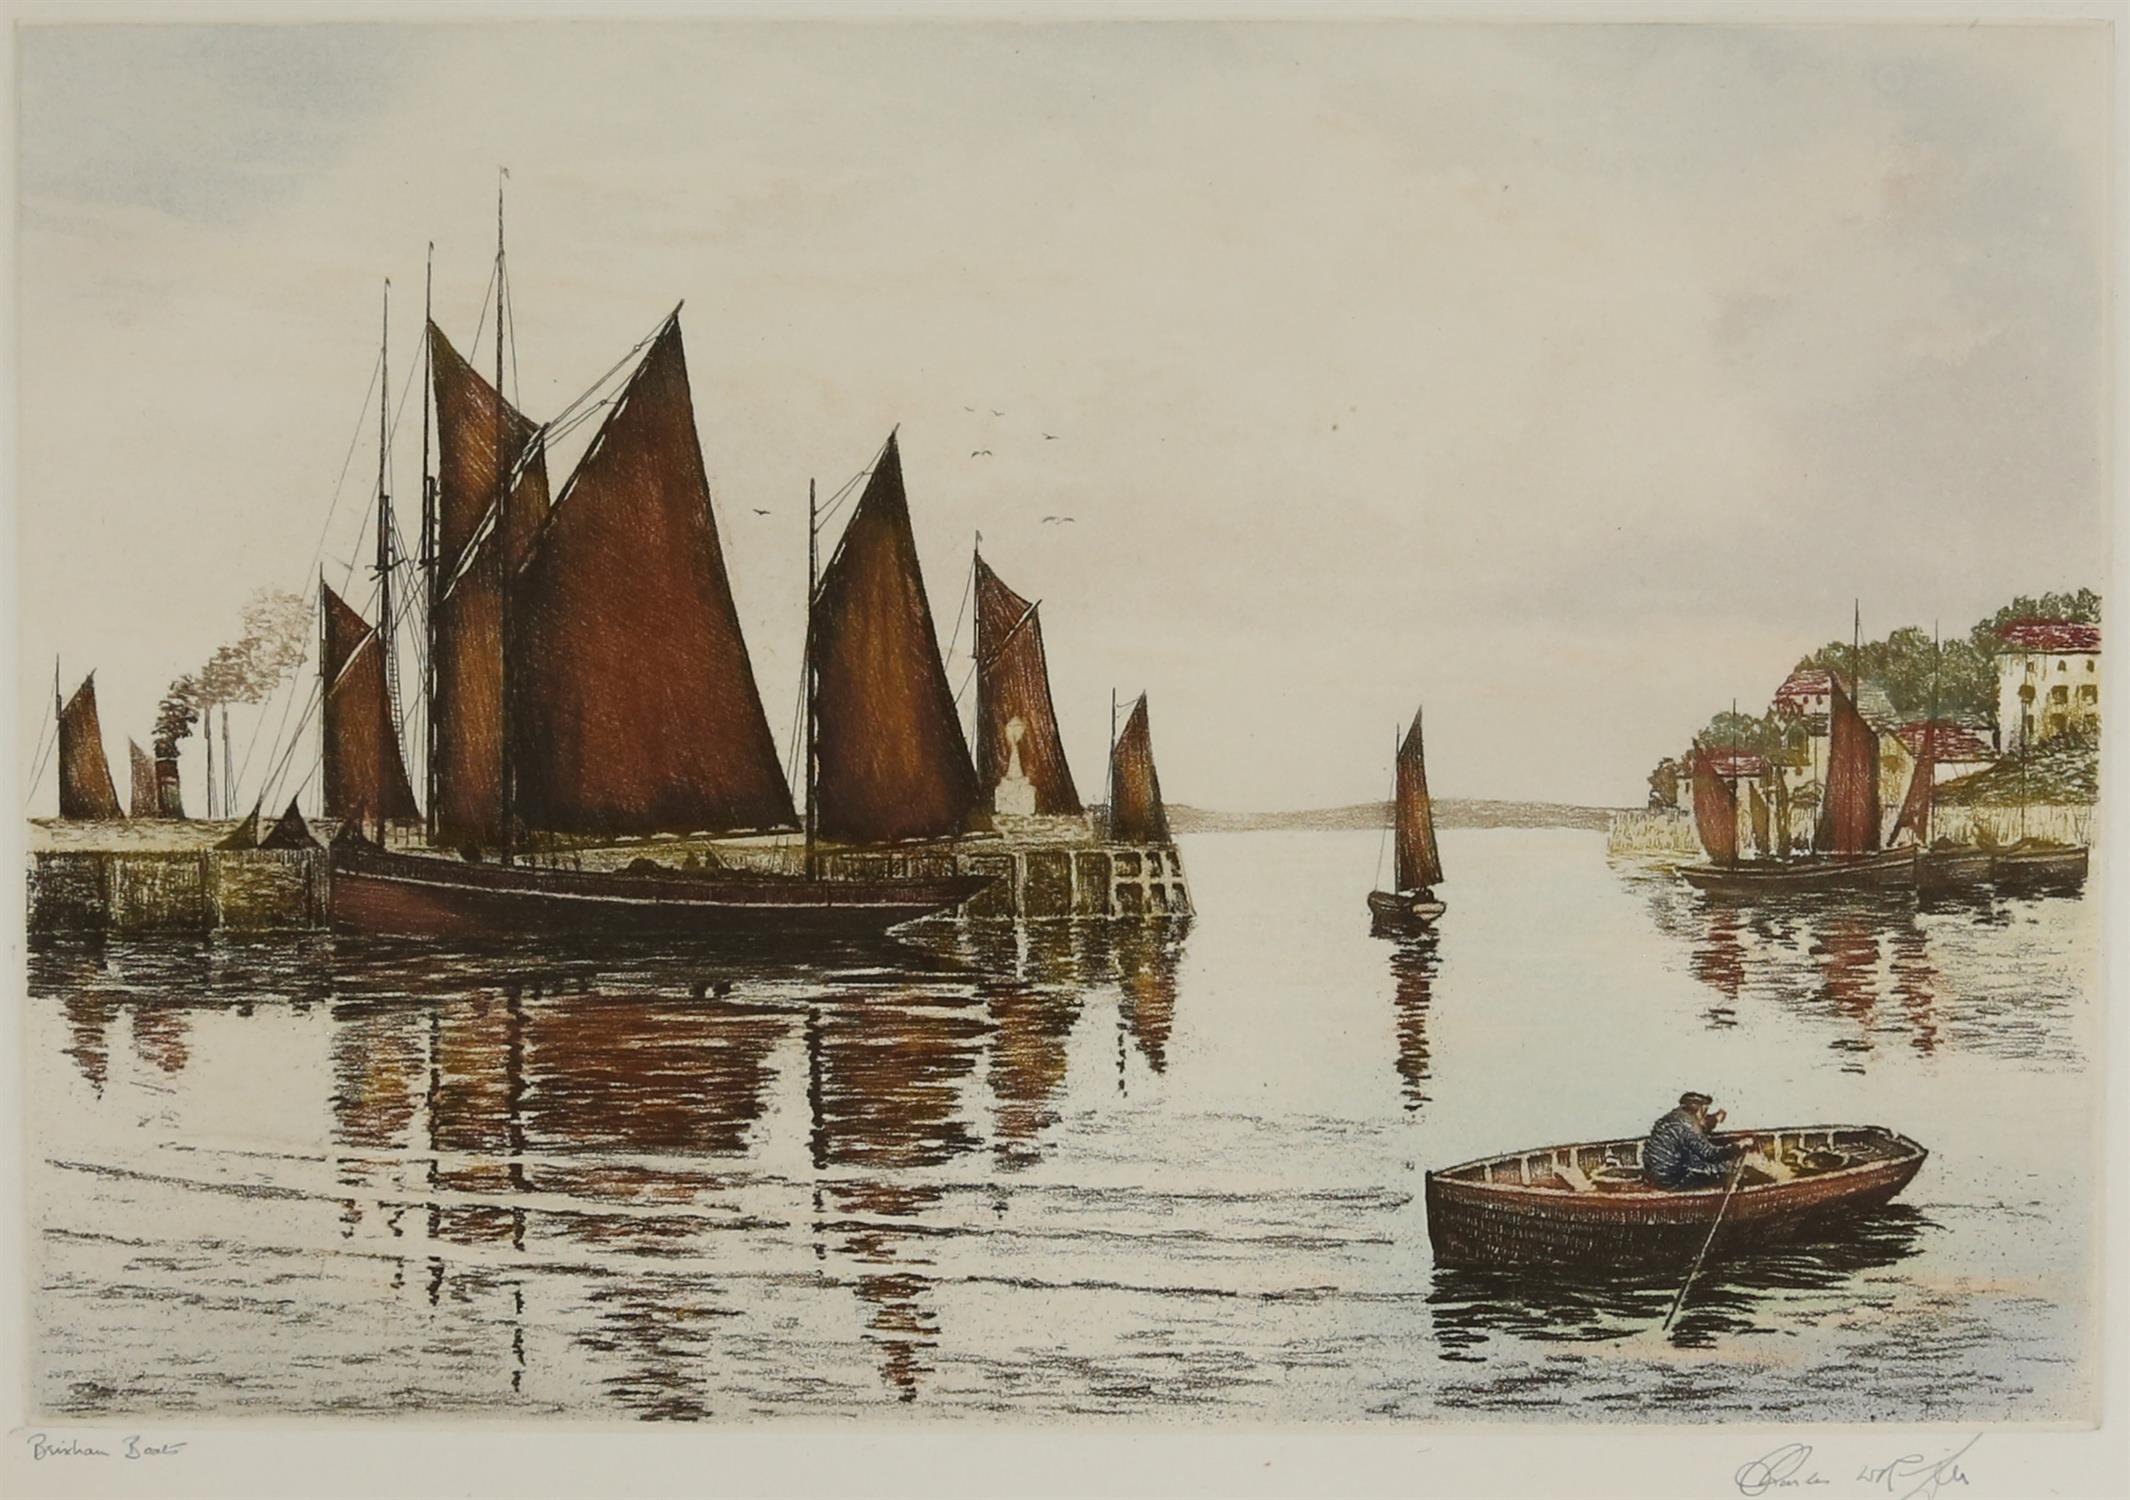 Charles Riley 'Brixham boats' etching printed in colour, signed indistinctly and titled in pencil.